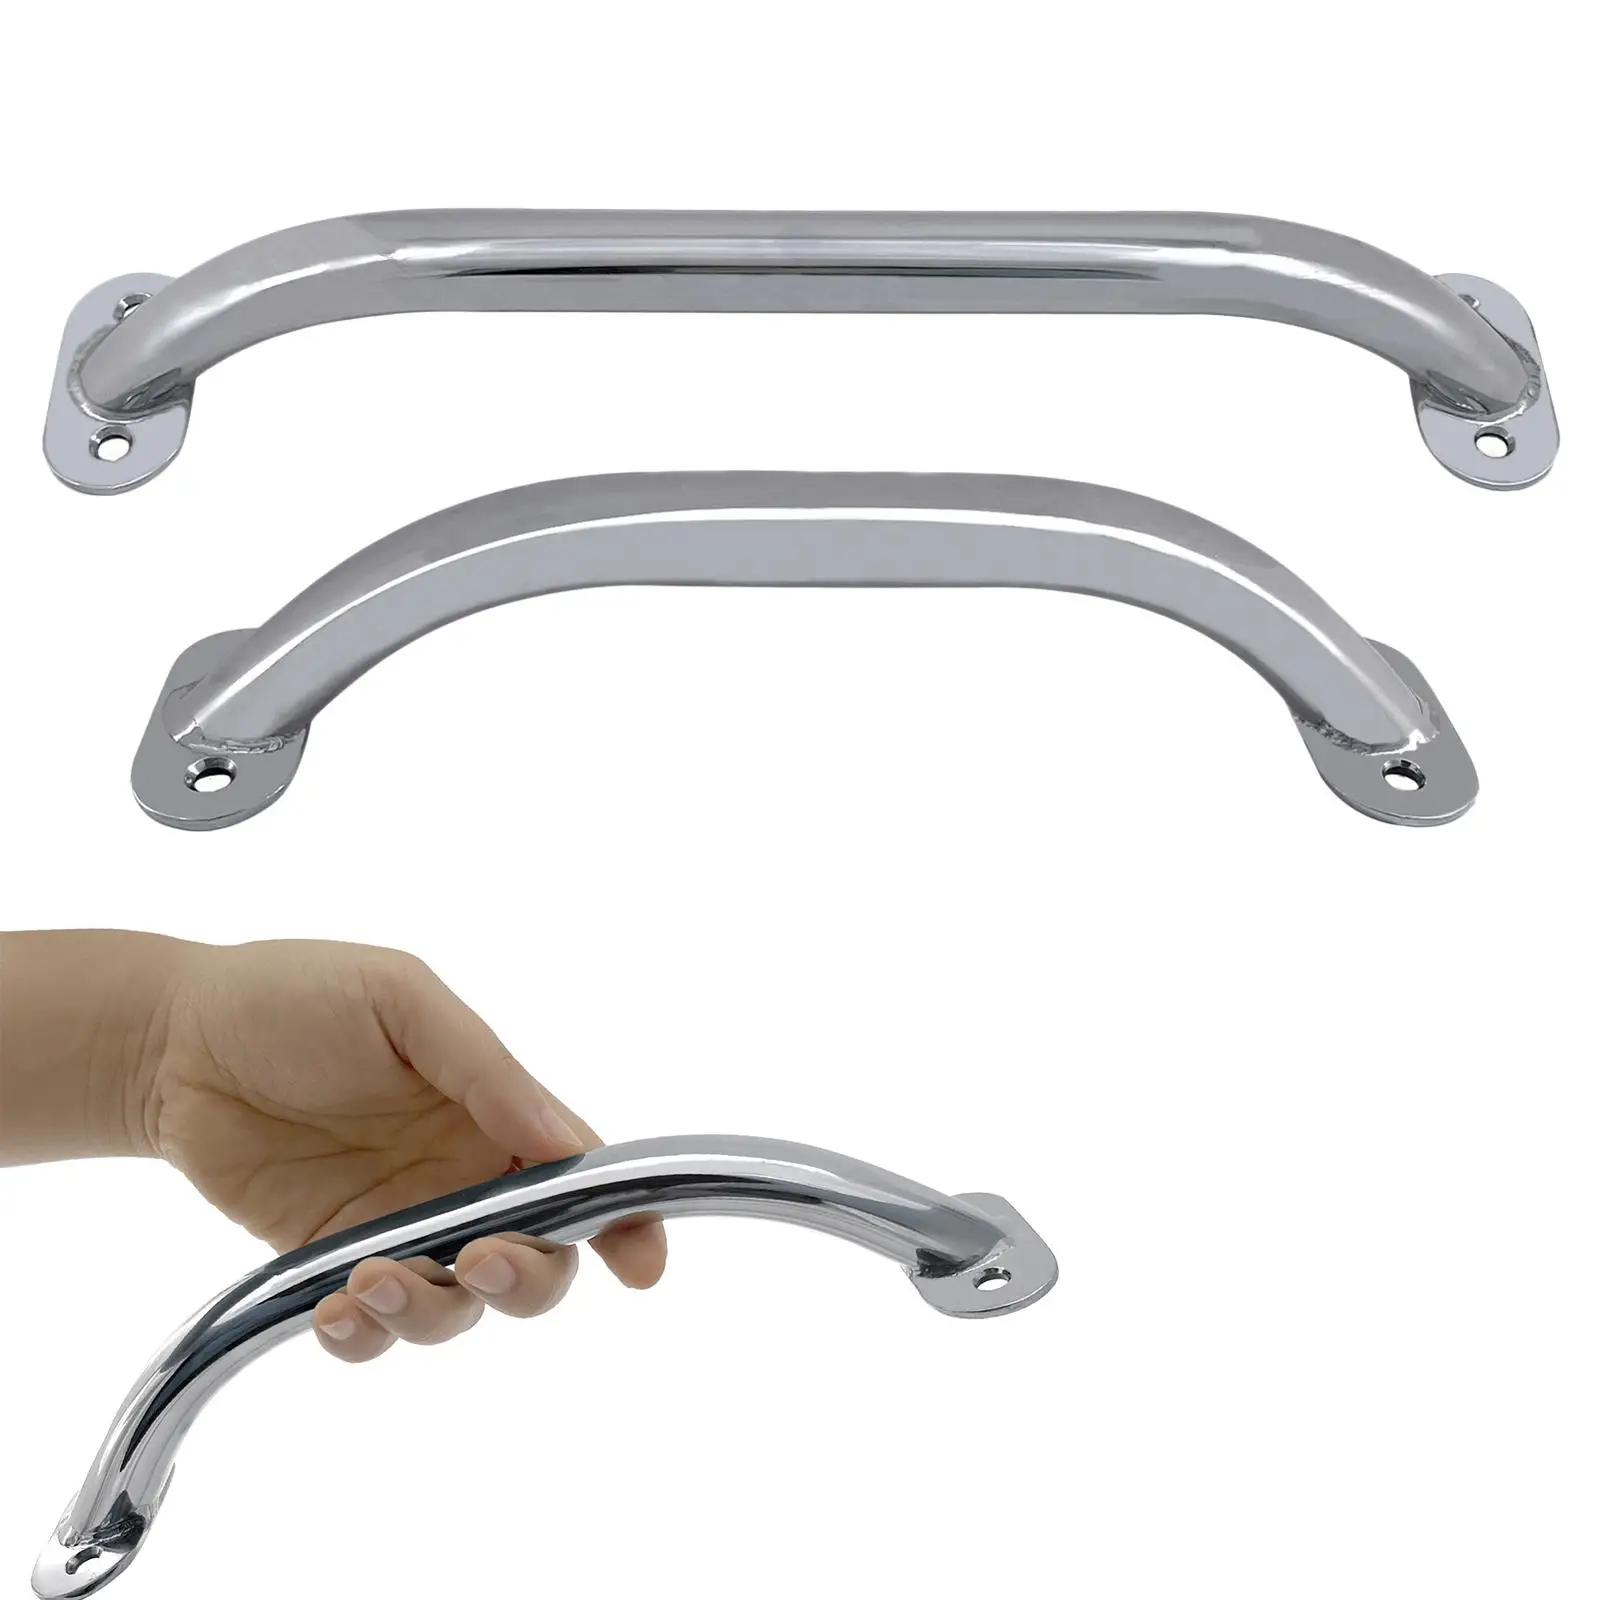 Stainless Steel Boat Grab Handle Marine Handrail for Boat Accessories Advanced manufacturing technology,